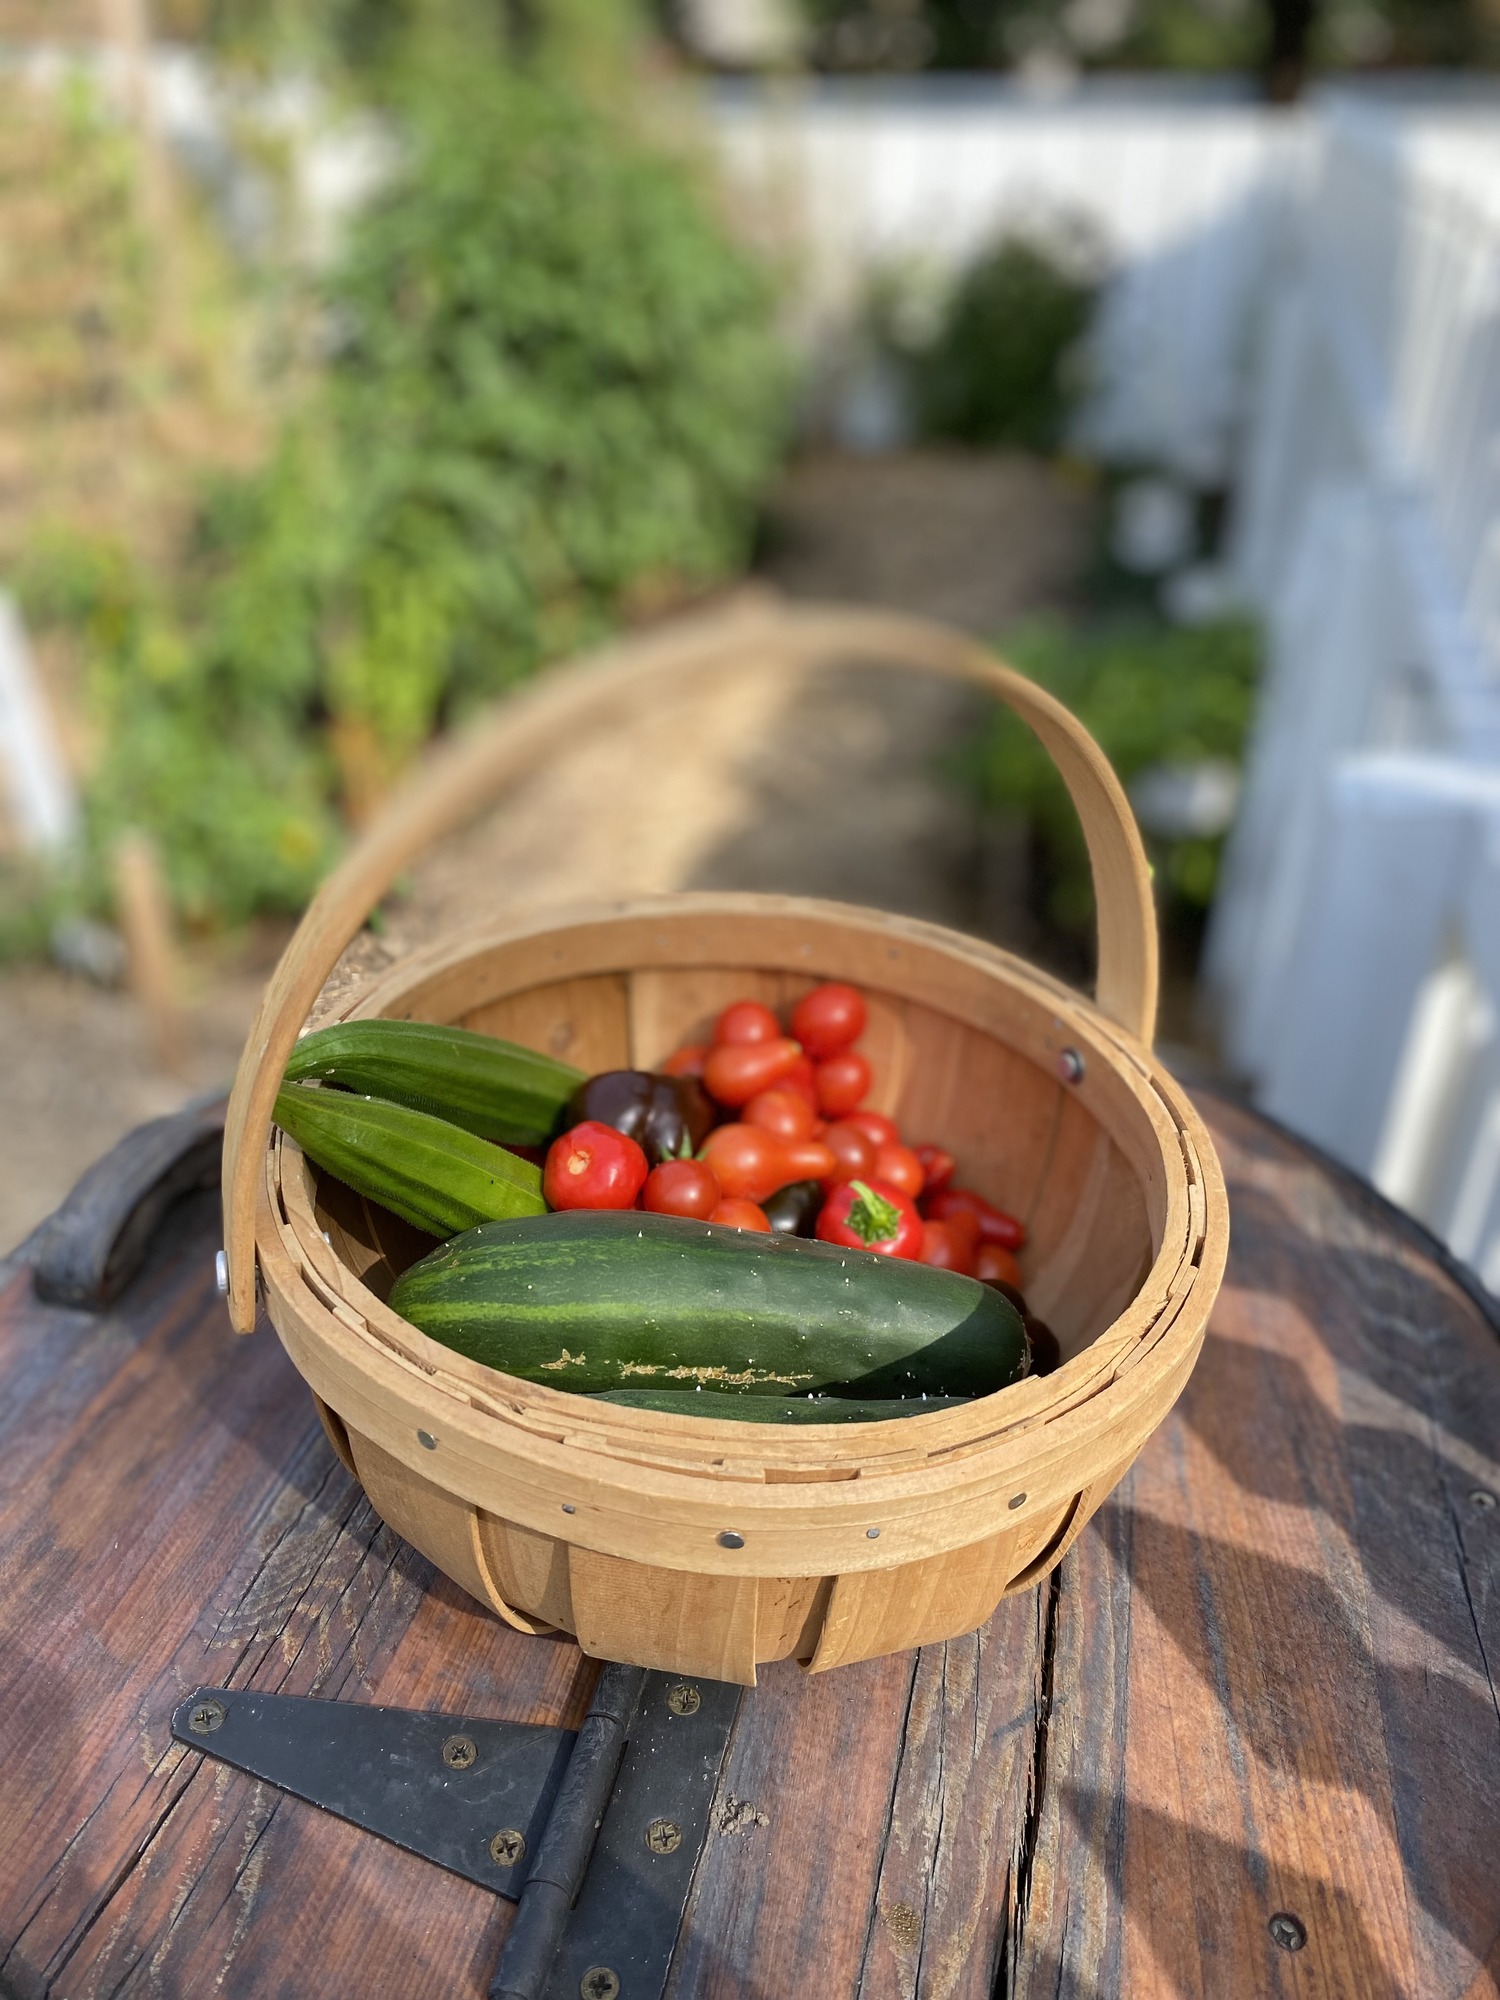 A basket filled with cucumbers, red peppers, and tomatoes from the garden.